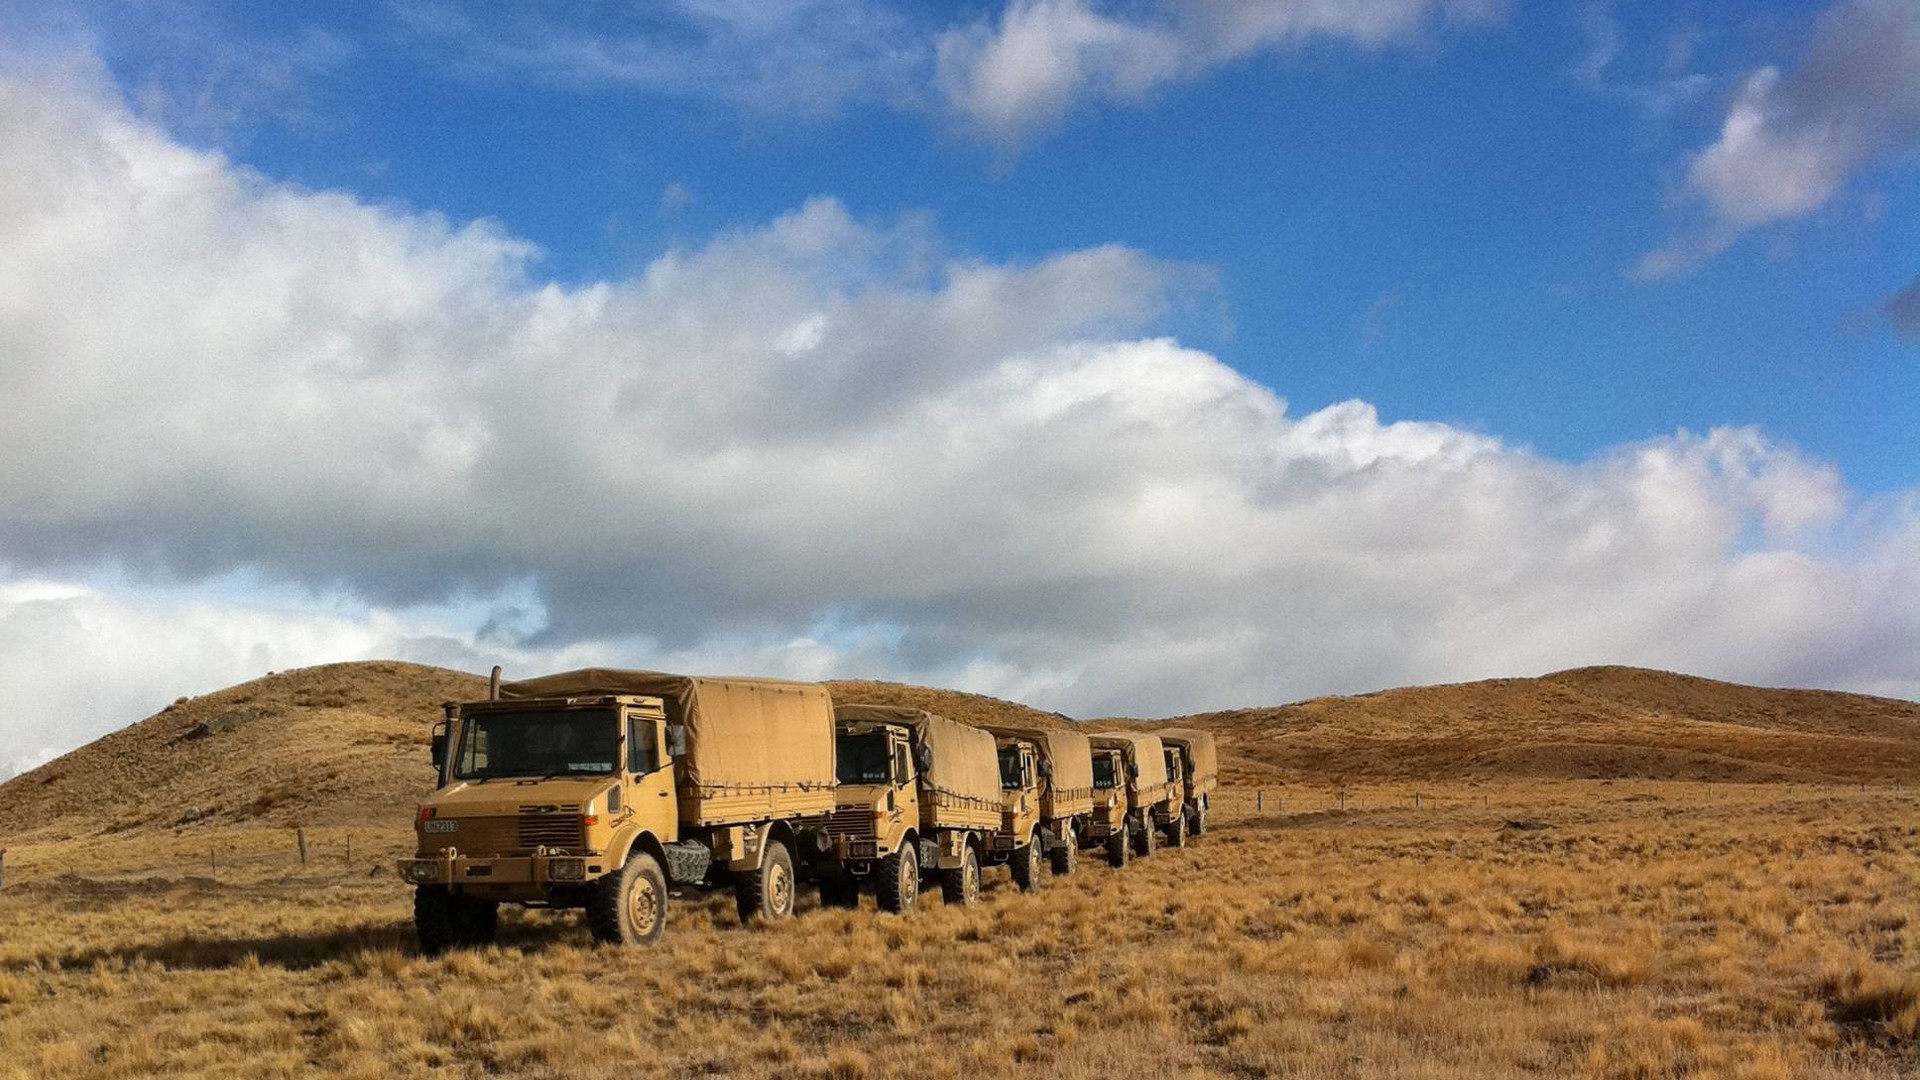 General 1920x1080 military New Zealand vehicle sky military vehicle truck landscape New Zealand Army army transport